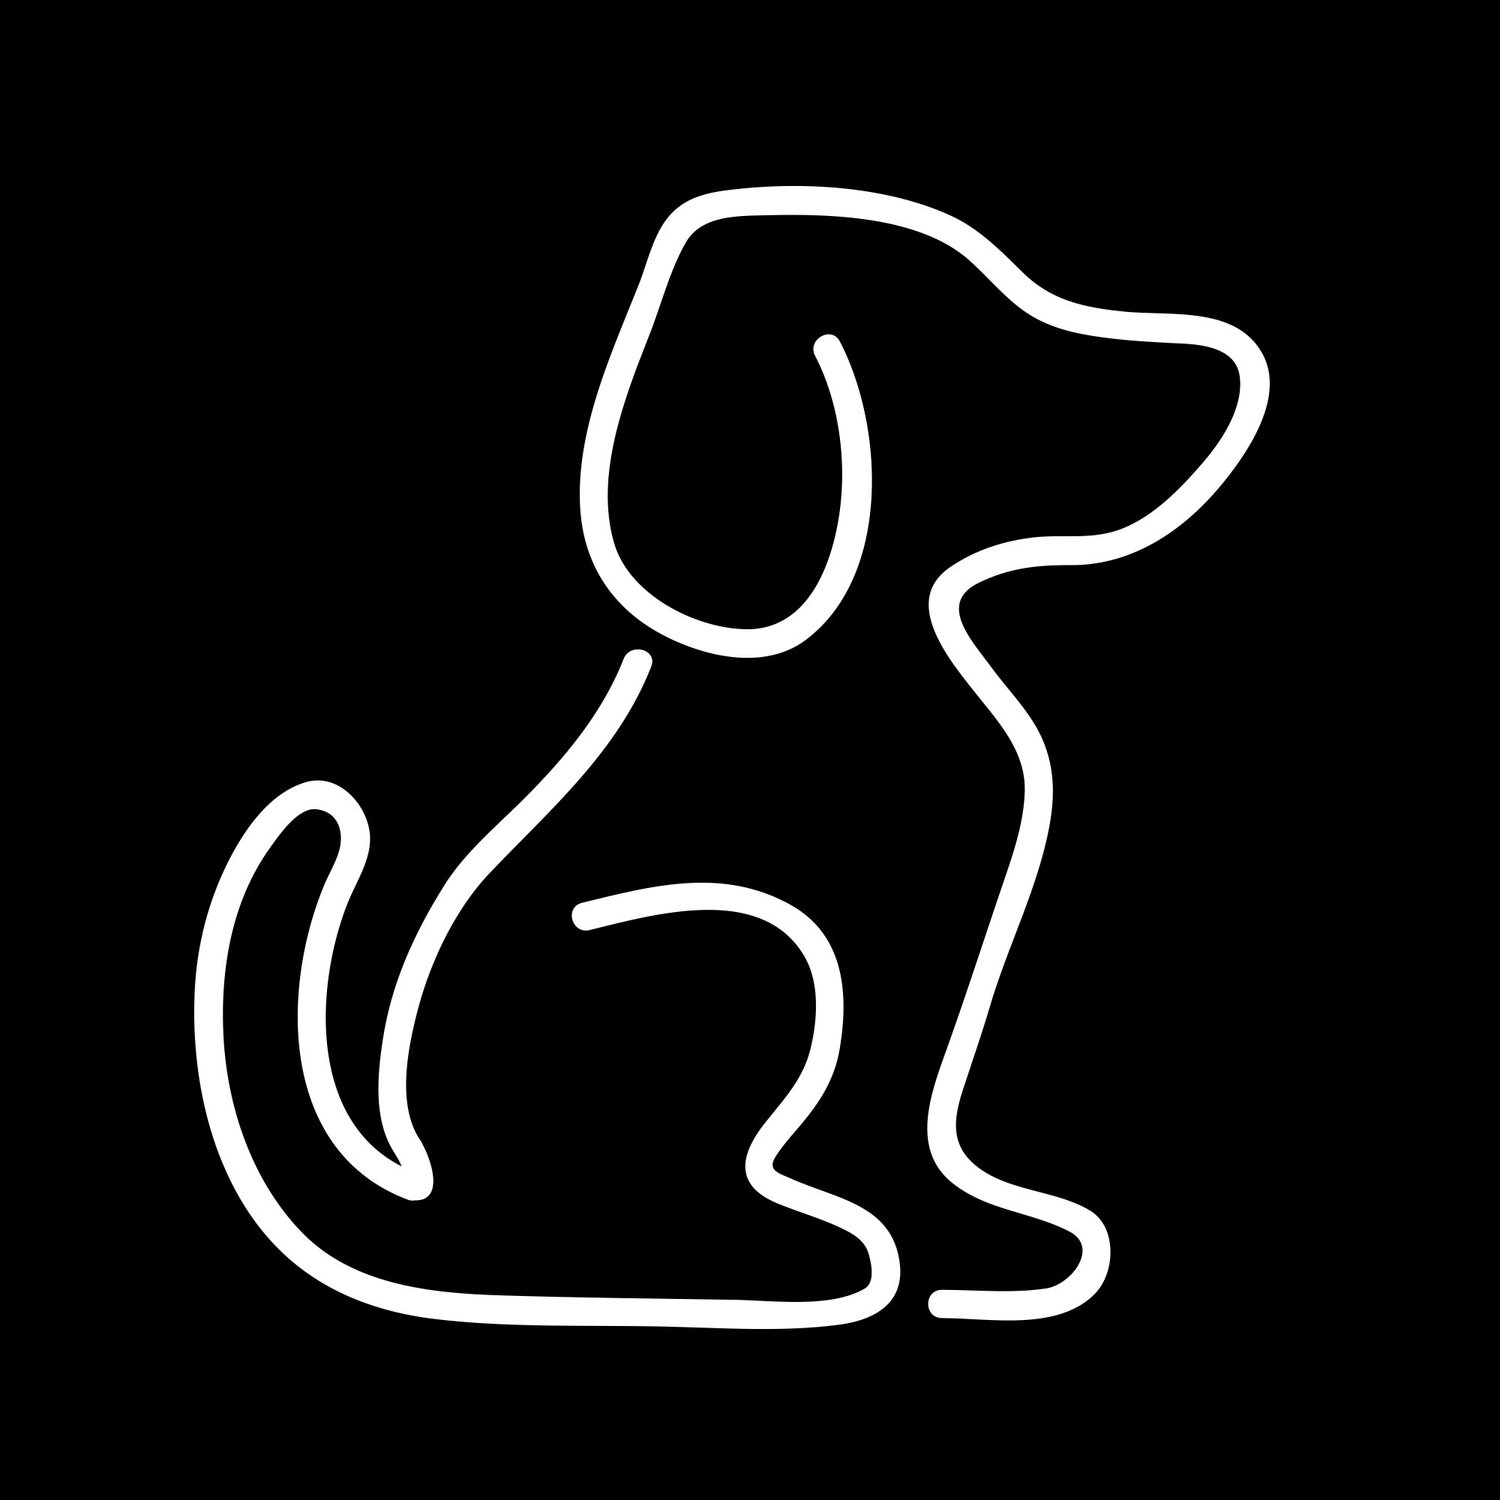 West London dog training centre, Animal Wellbeing Centre, logo. It shows an illustration of a dog facing side ways 